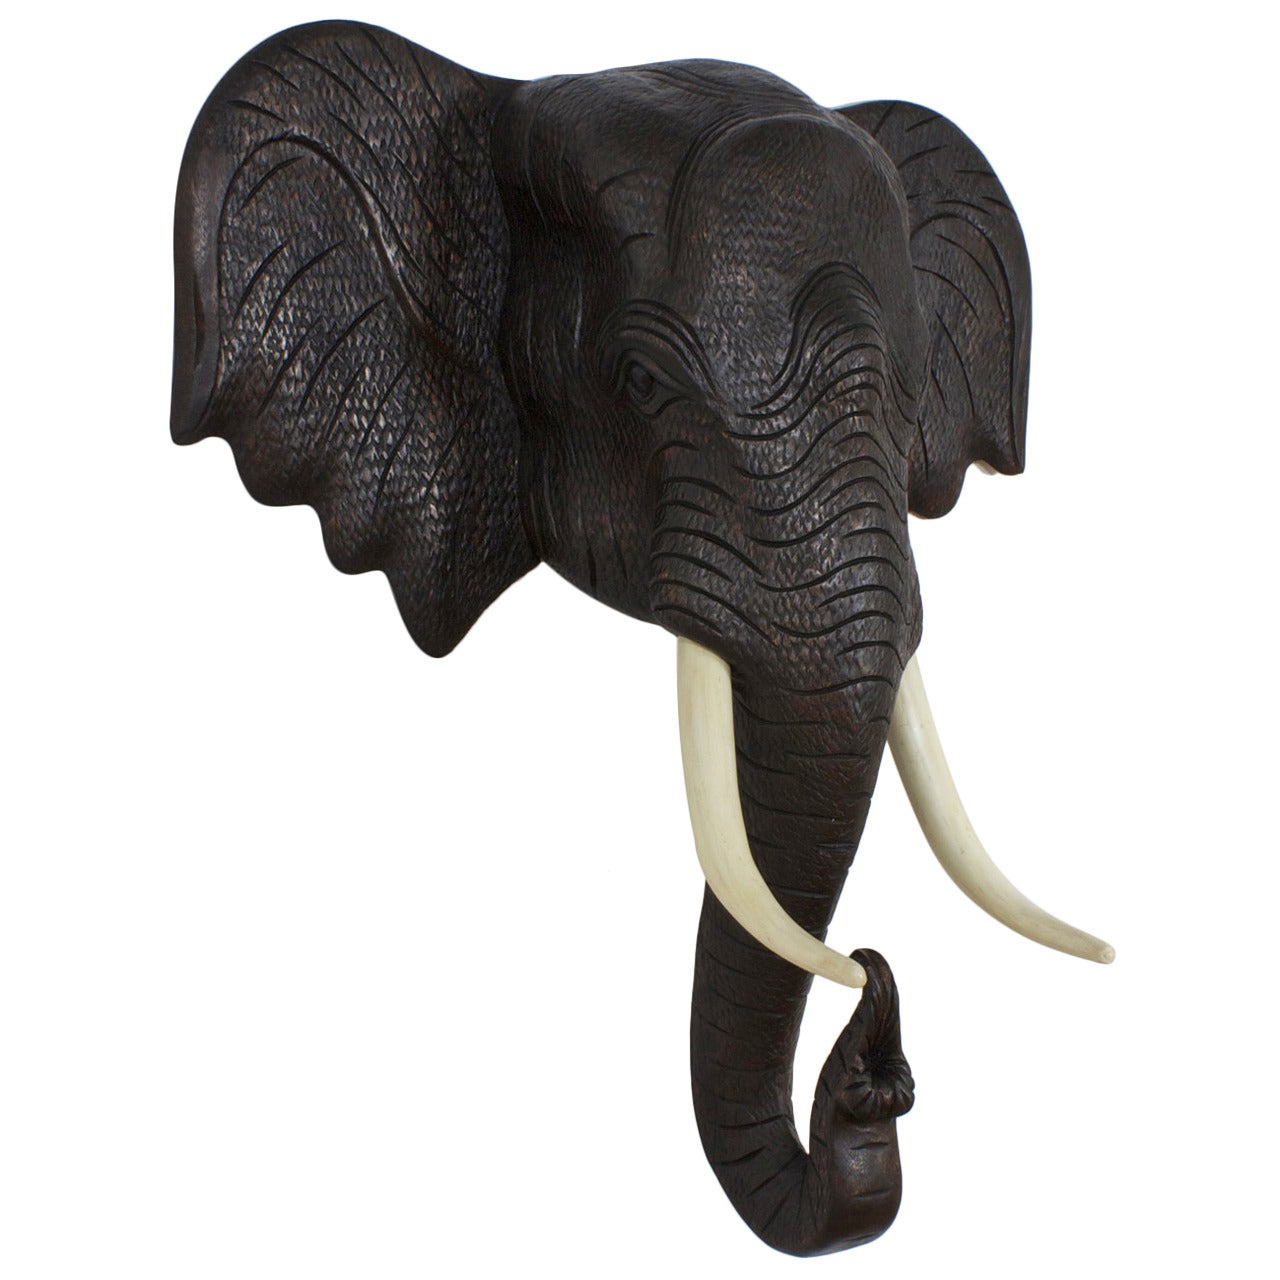 Carved Wood Elephant Head Sculpture